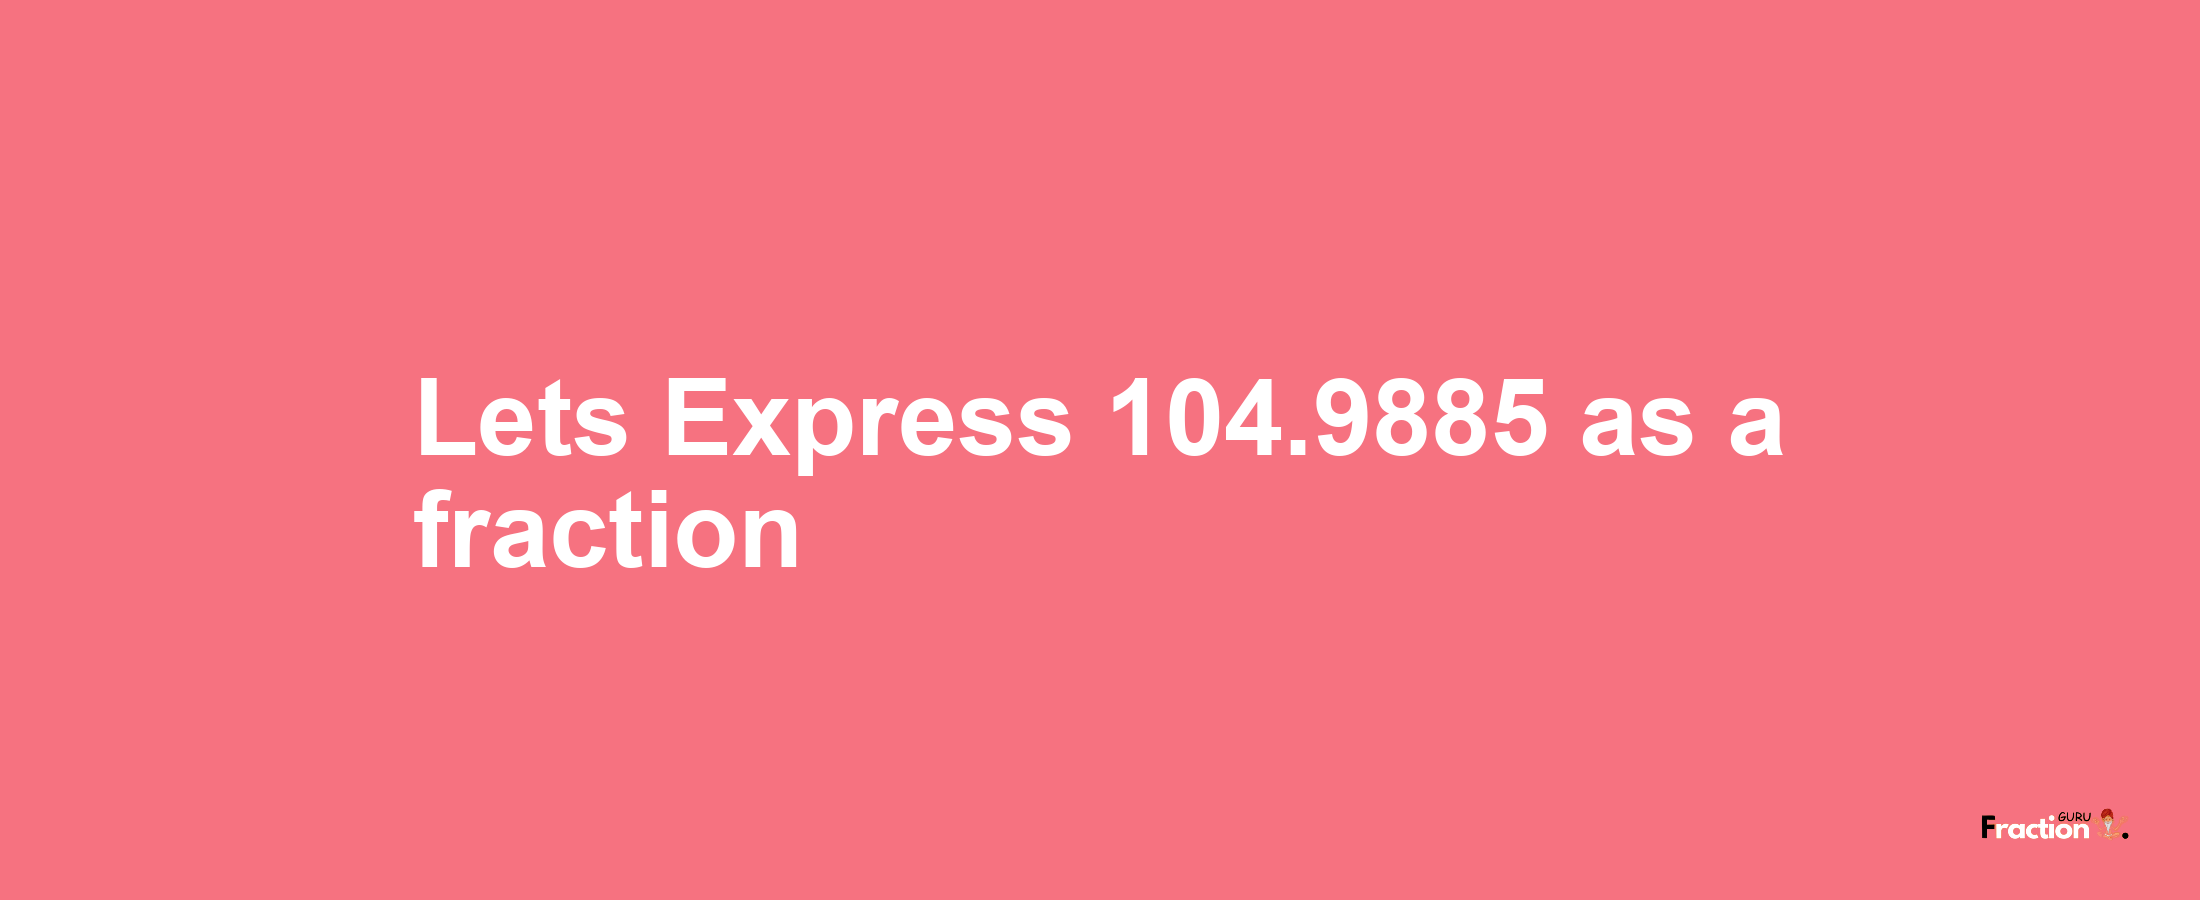 Lets Express 104.9885 as afraction